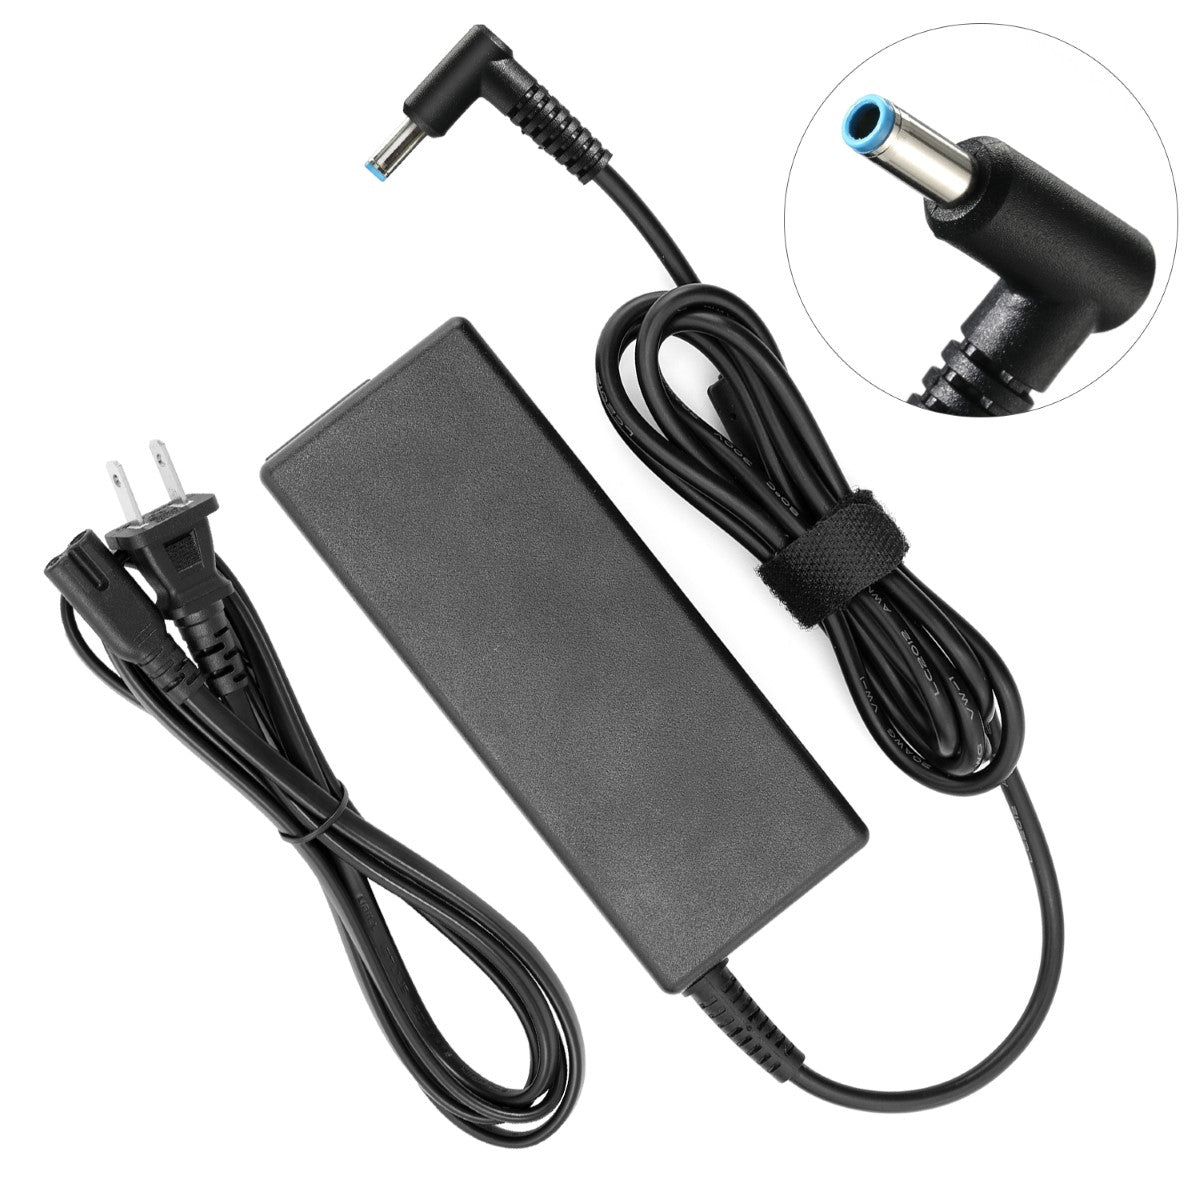 Charger for HP Envy Touchsmart m7-j010dx Laptop